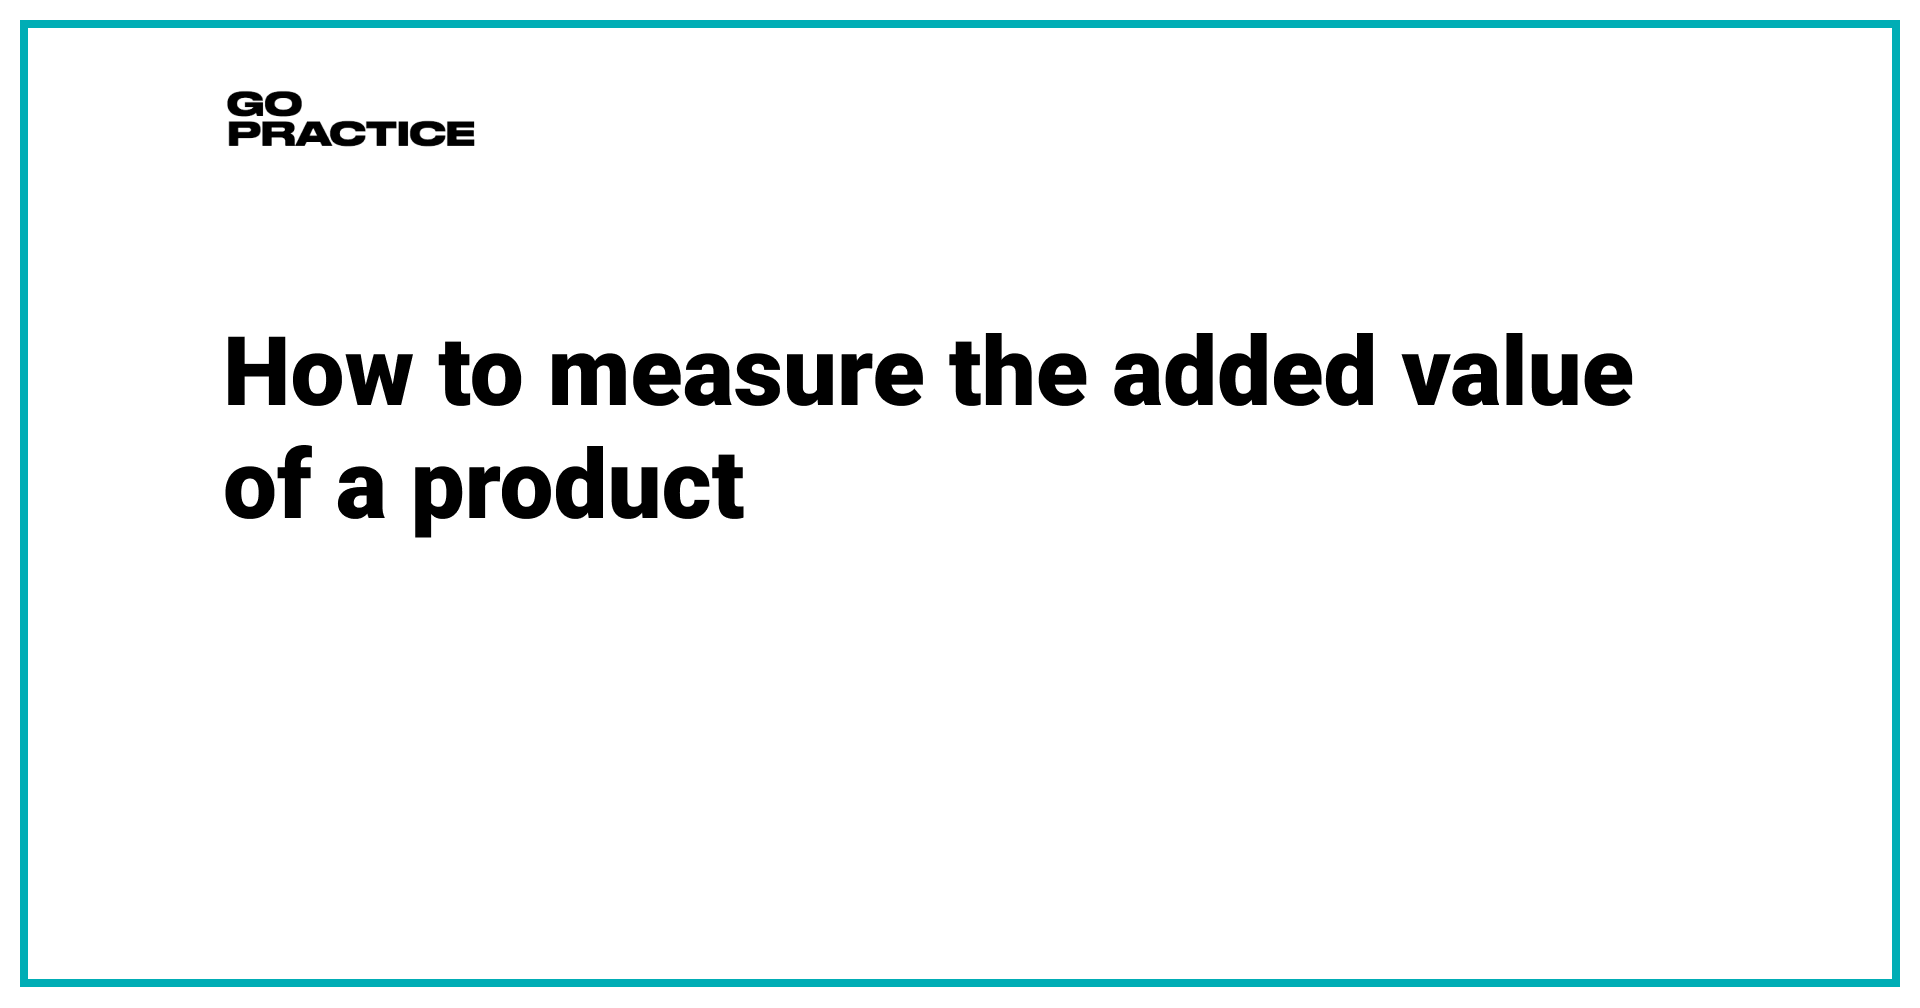 How to measure the added value of a product